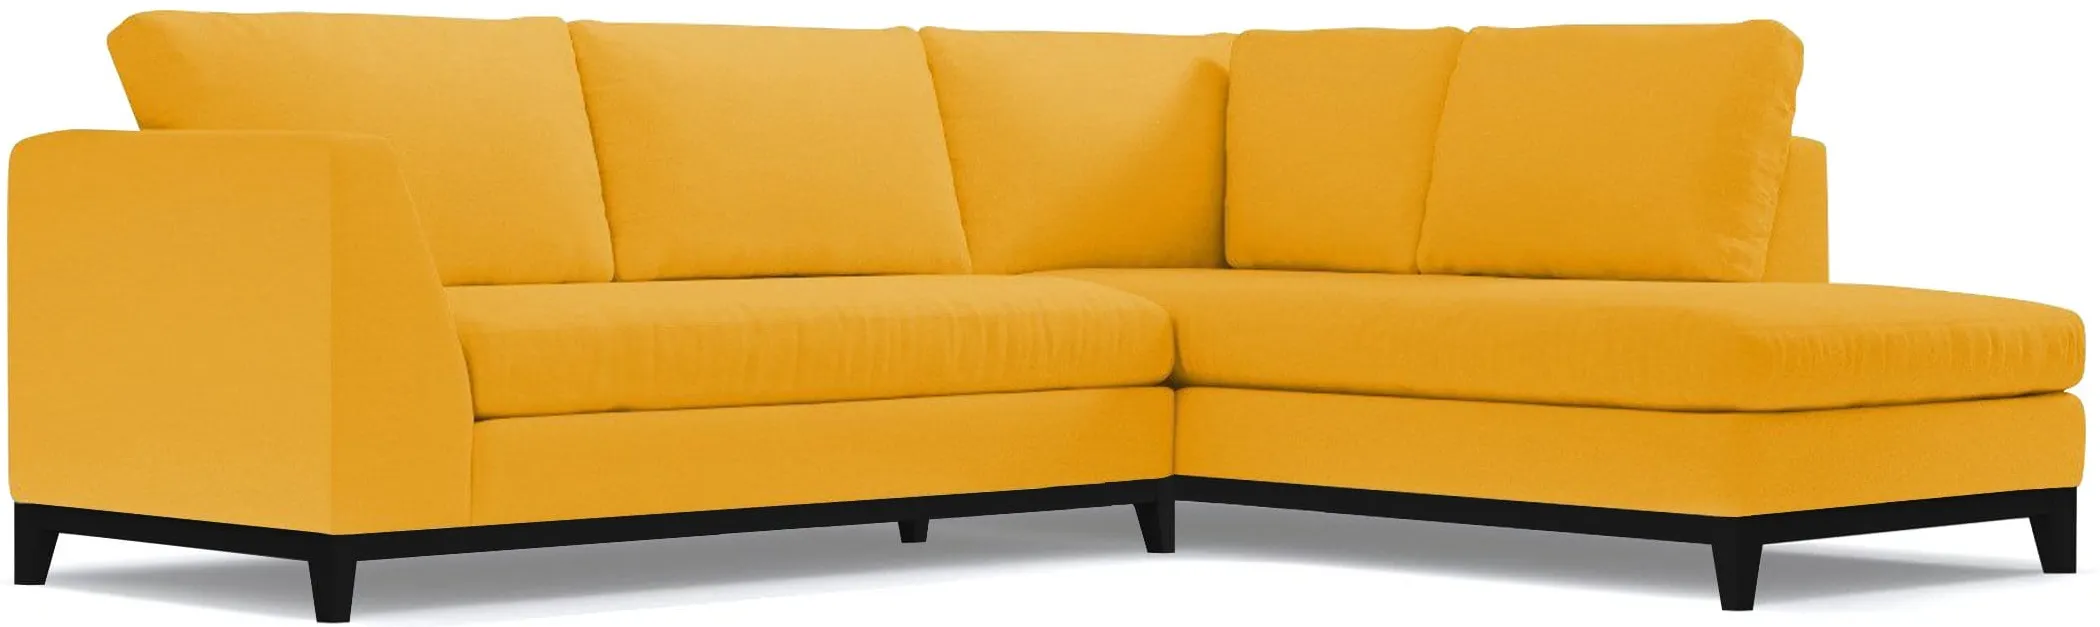 Mulholland Drive 2pc Sleeper Sectional